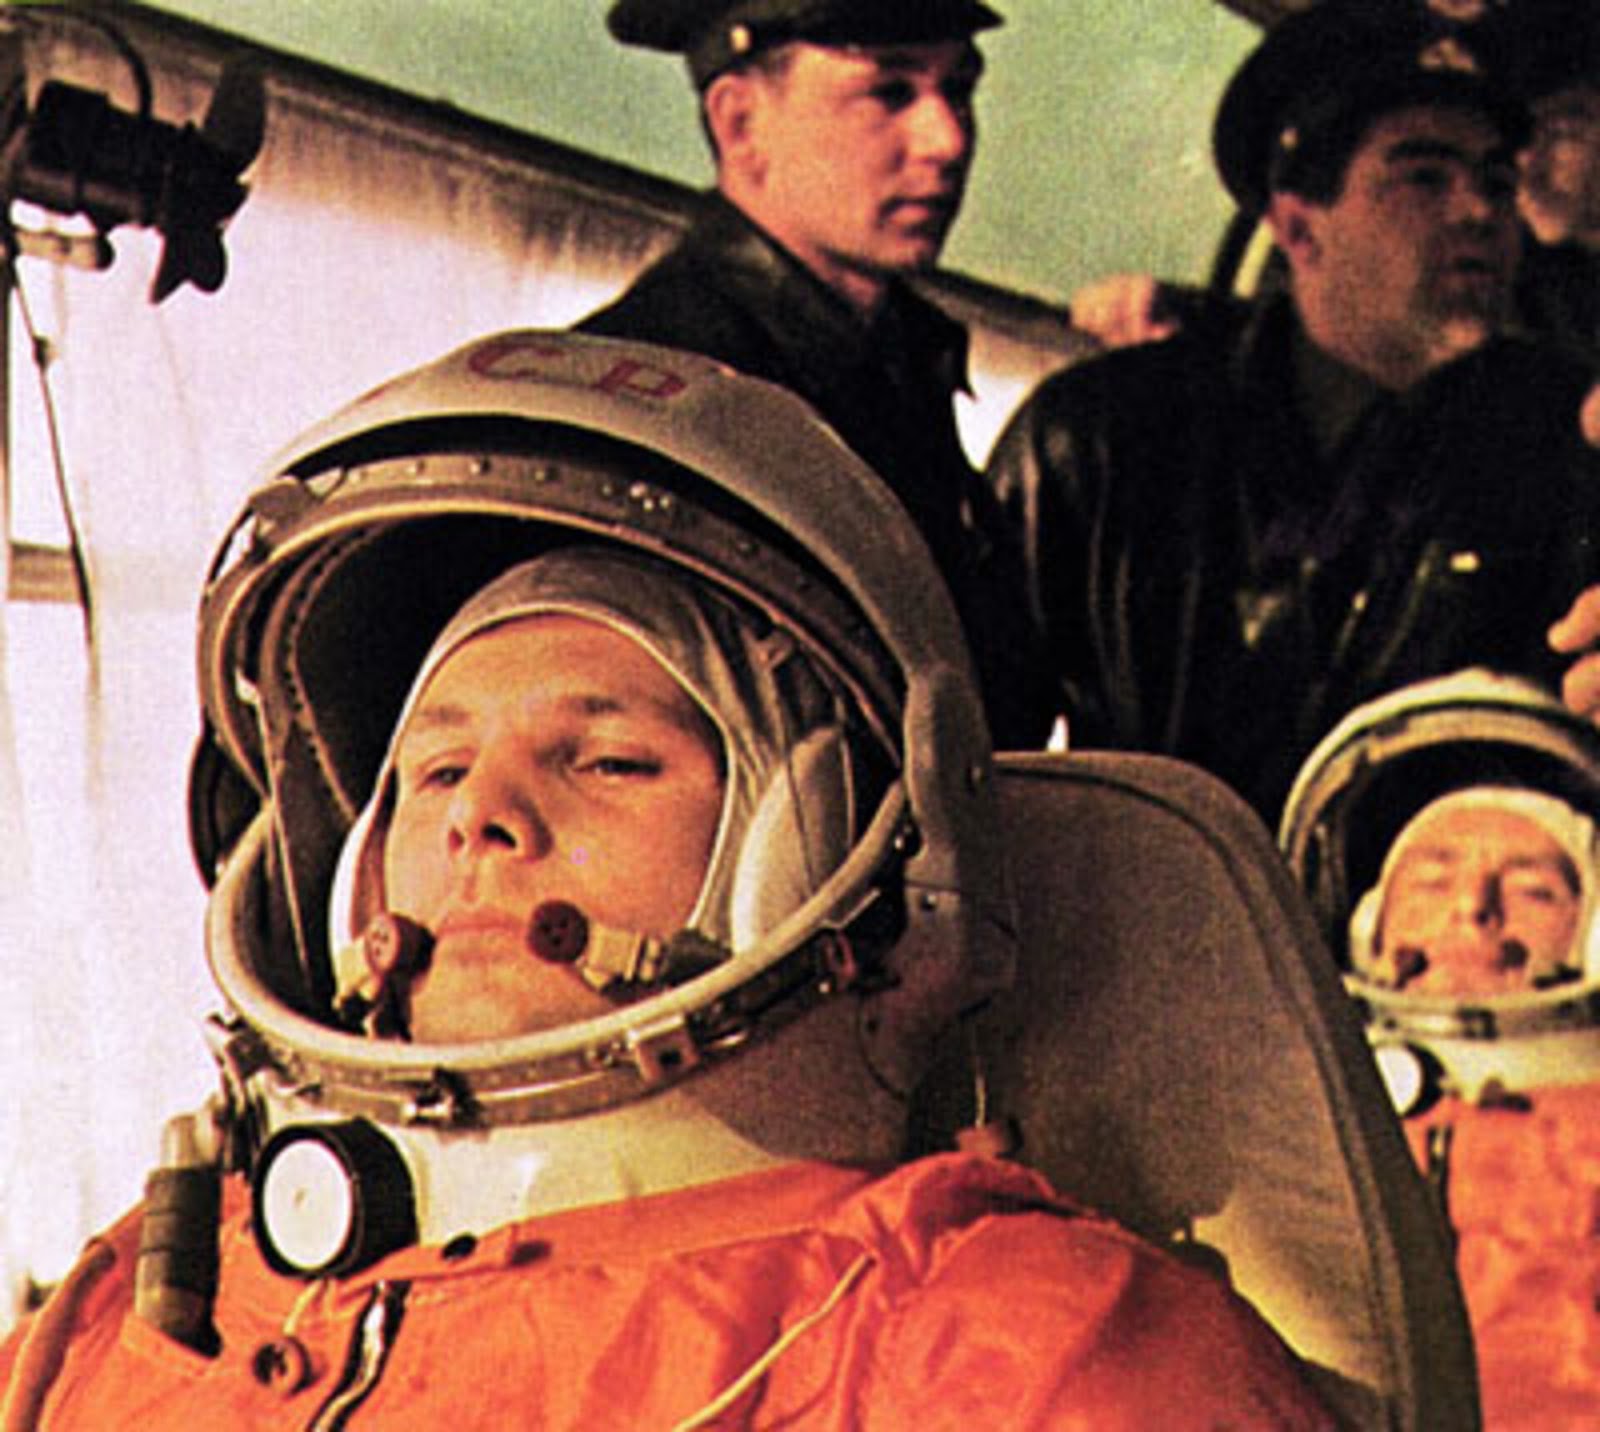 Two astronauts in full suits and helmets seated for a mission, with personnel in the background.